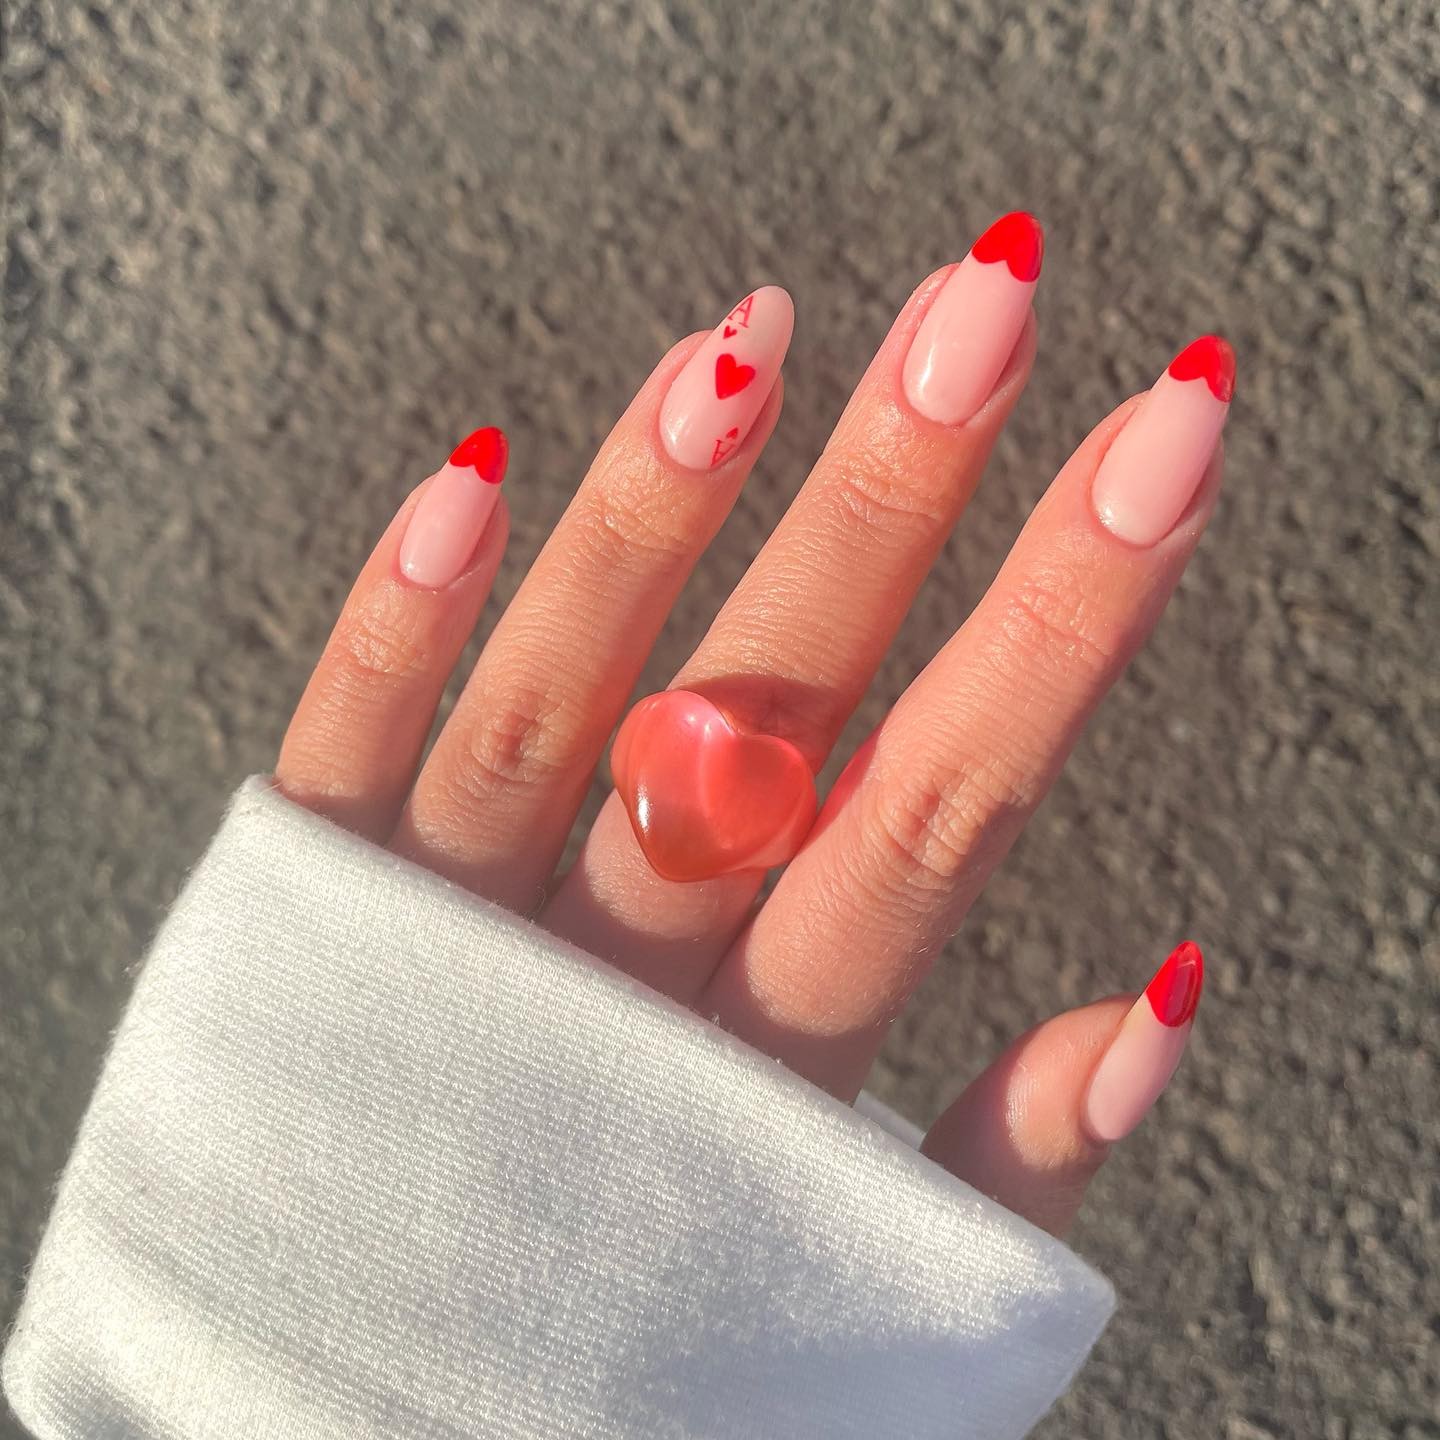 5 Valentine’s Day Nail Art Ideas to Try at Home